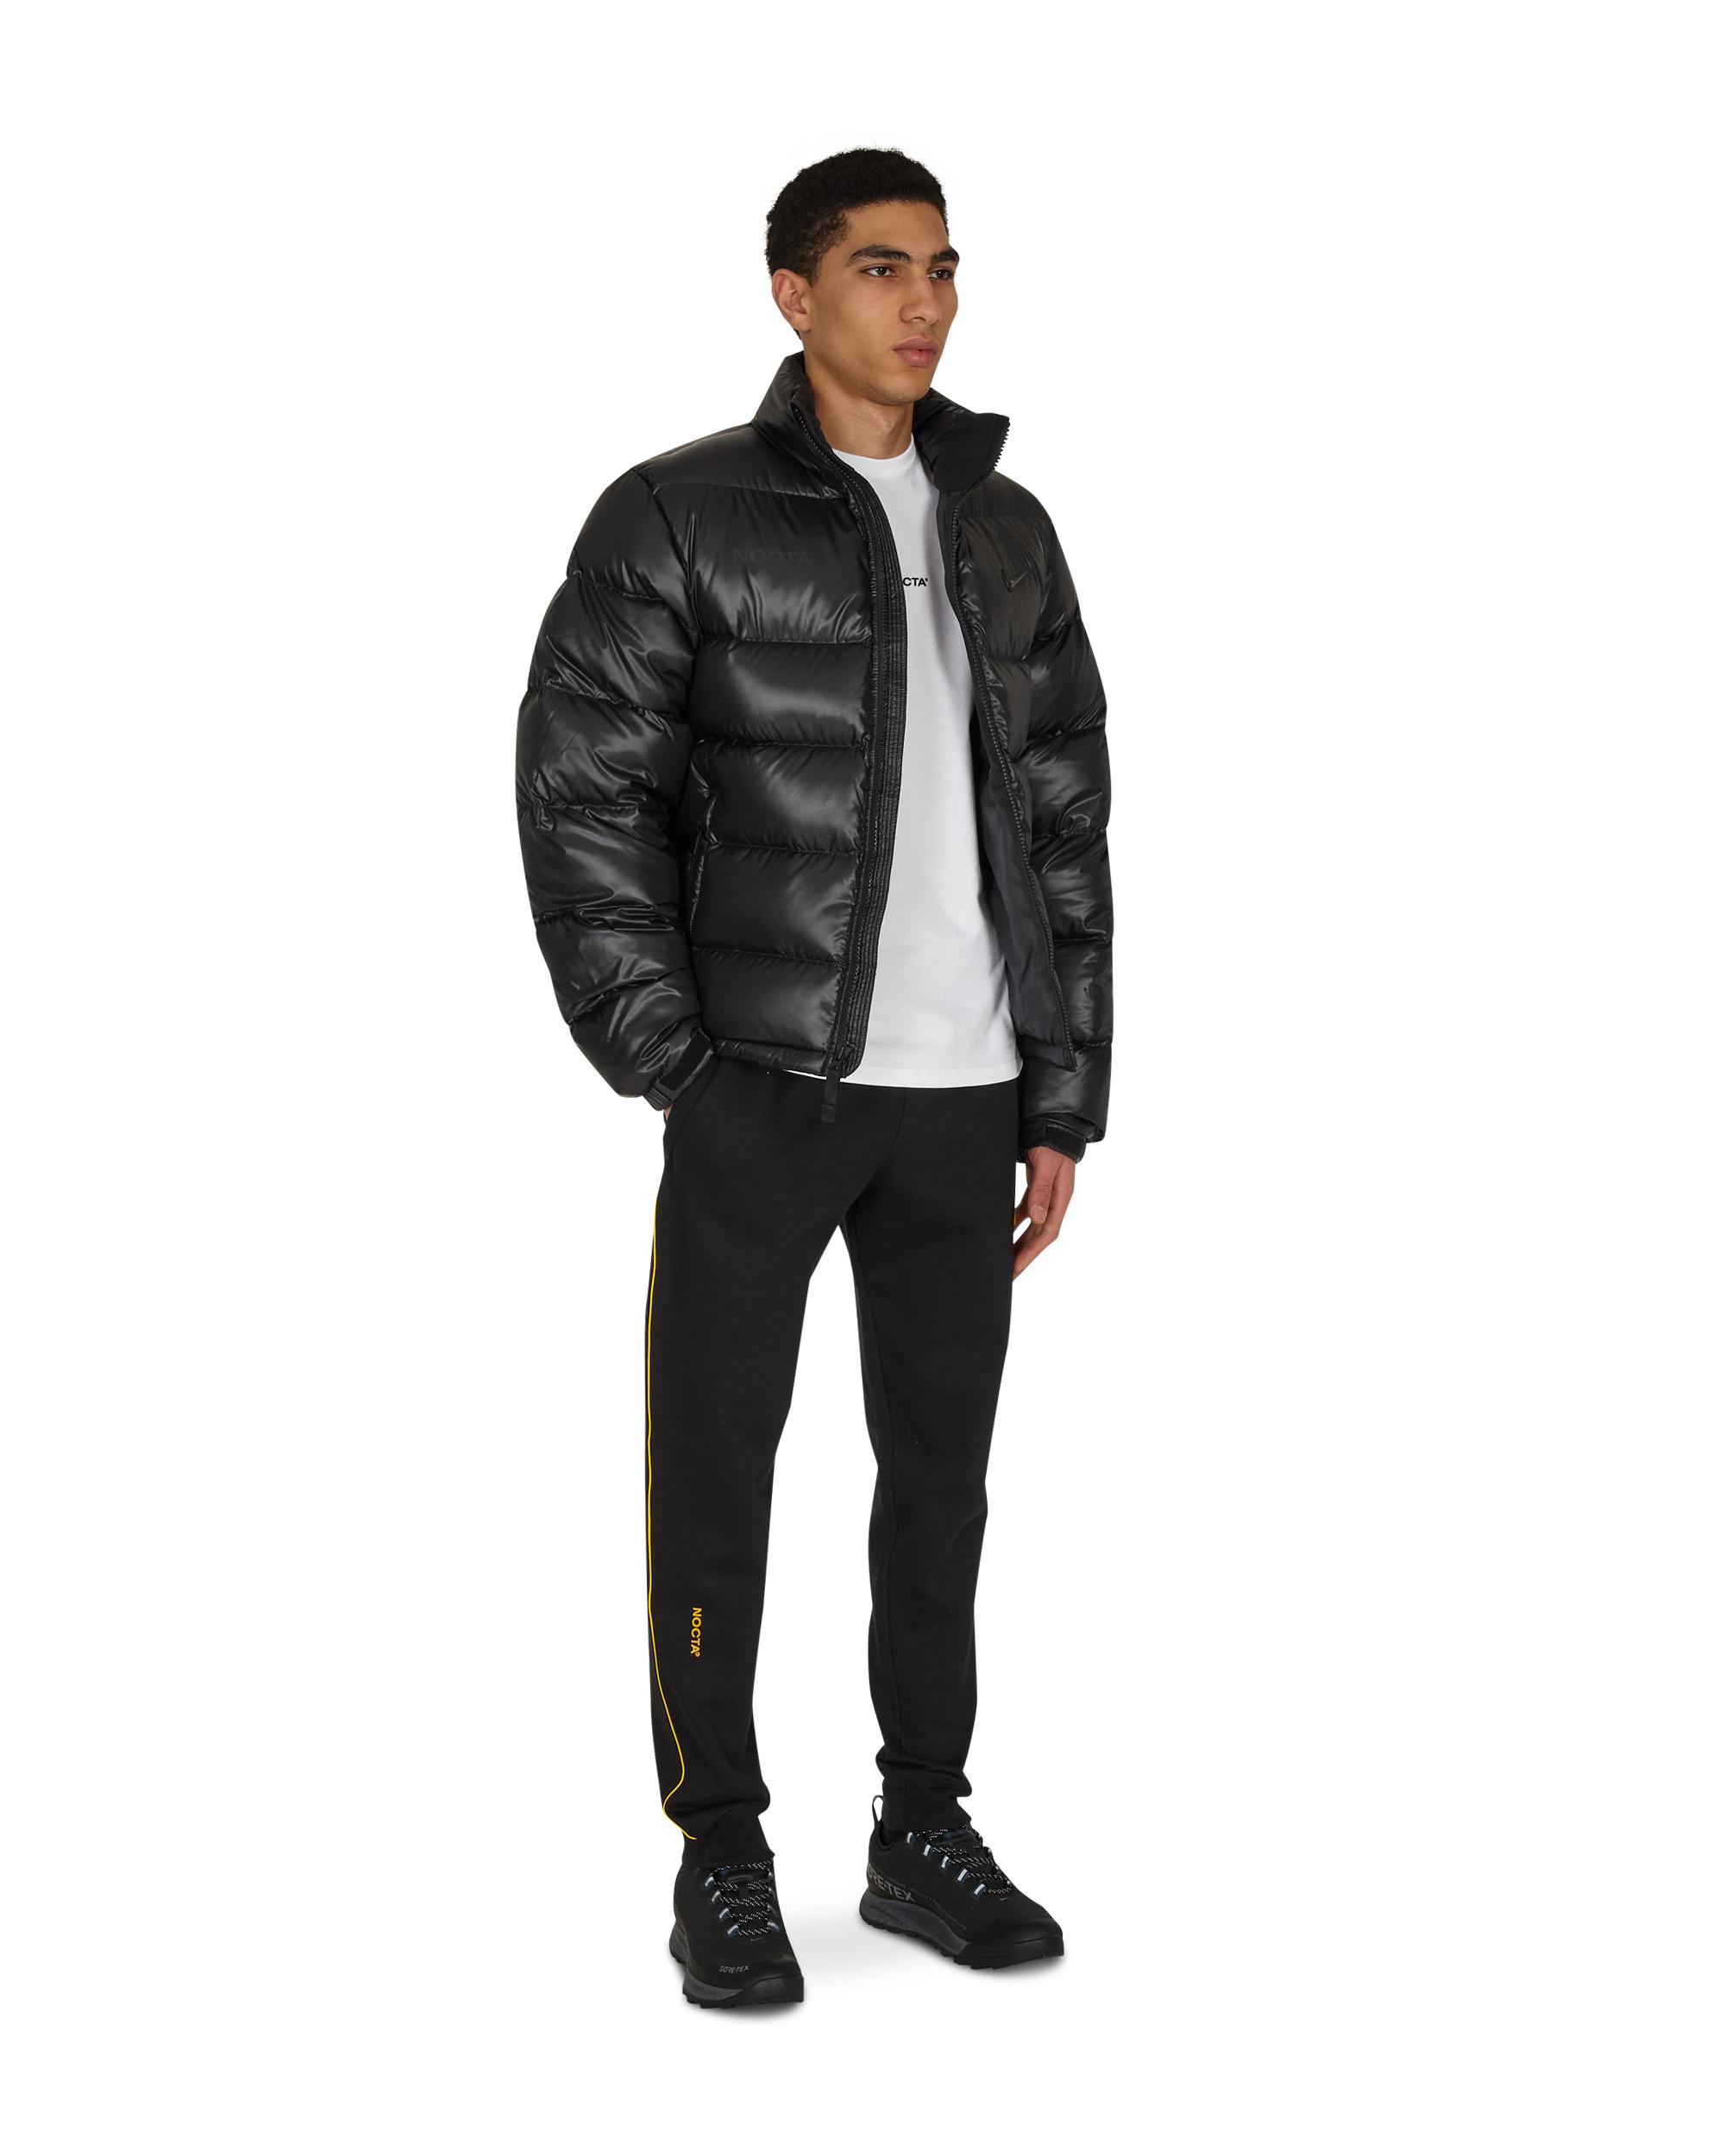 Nike Synthetic Nocta Puffer Jacket in University Gold (Black) for 